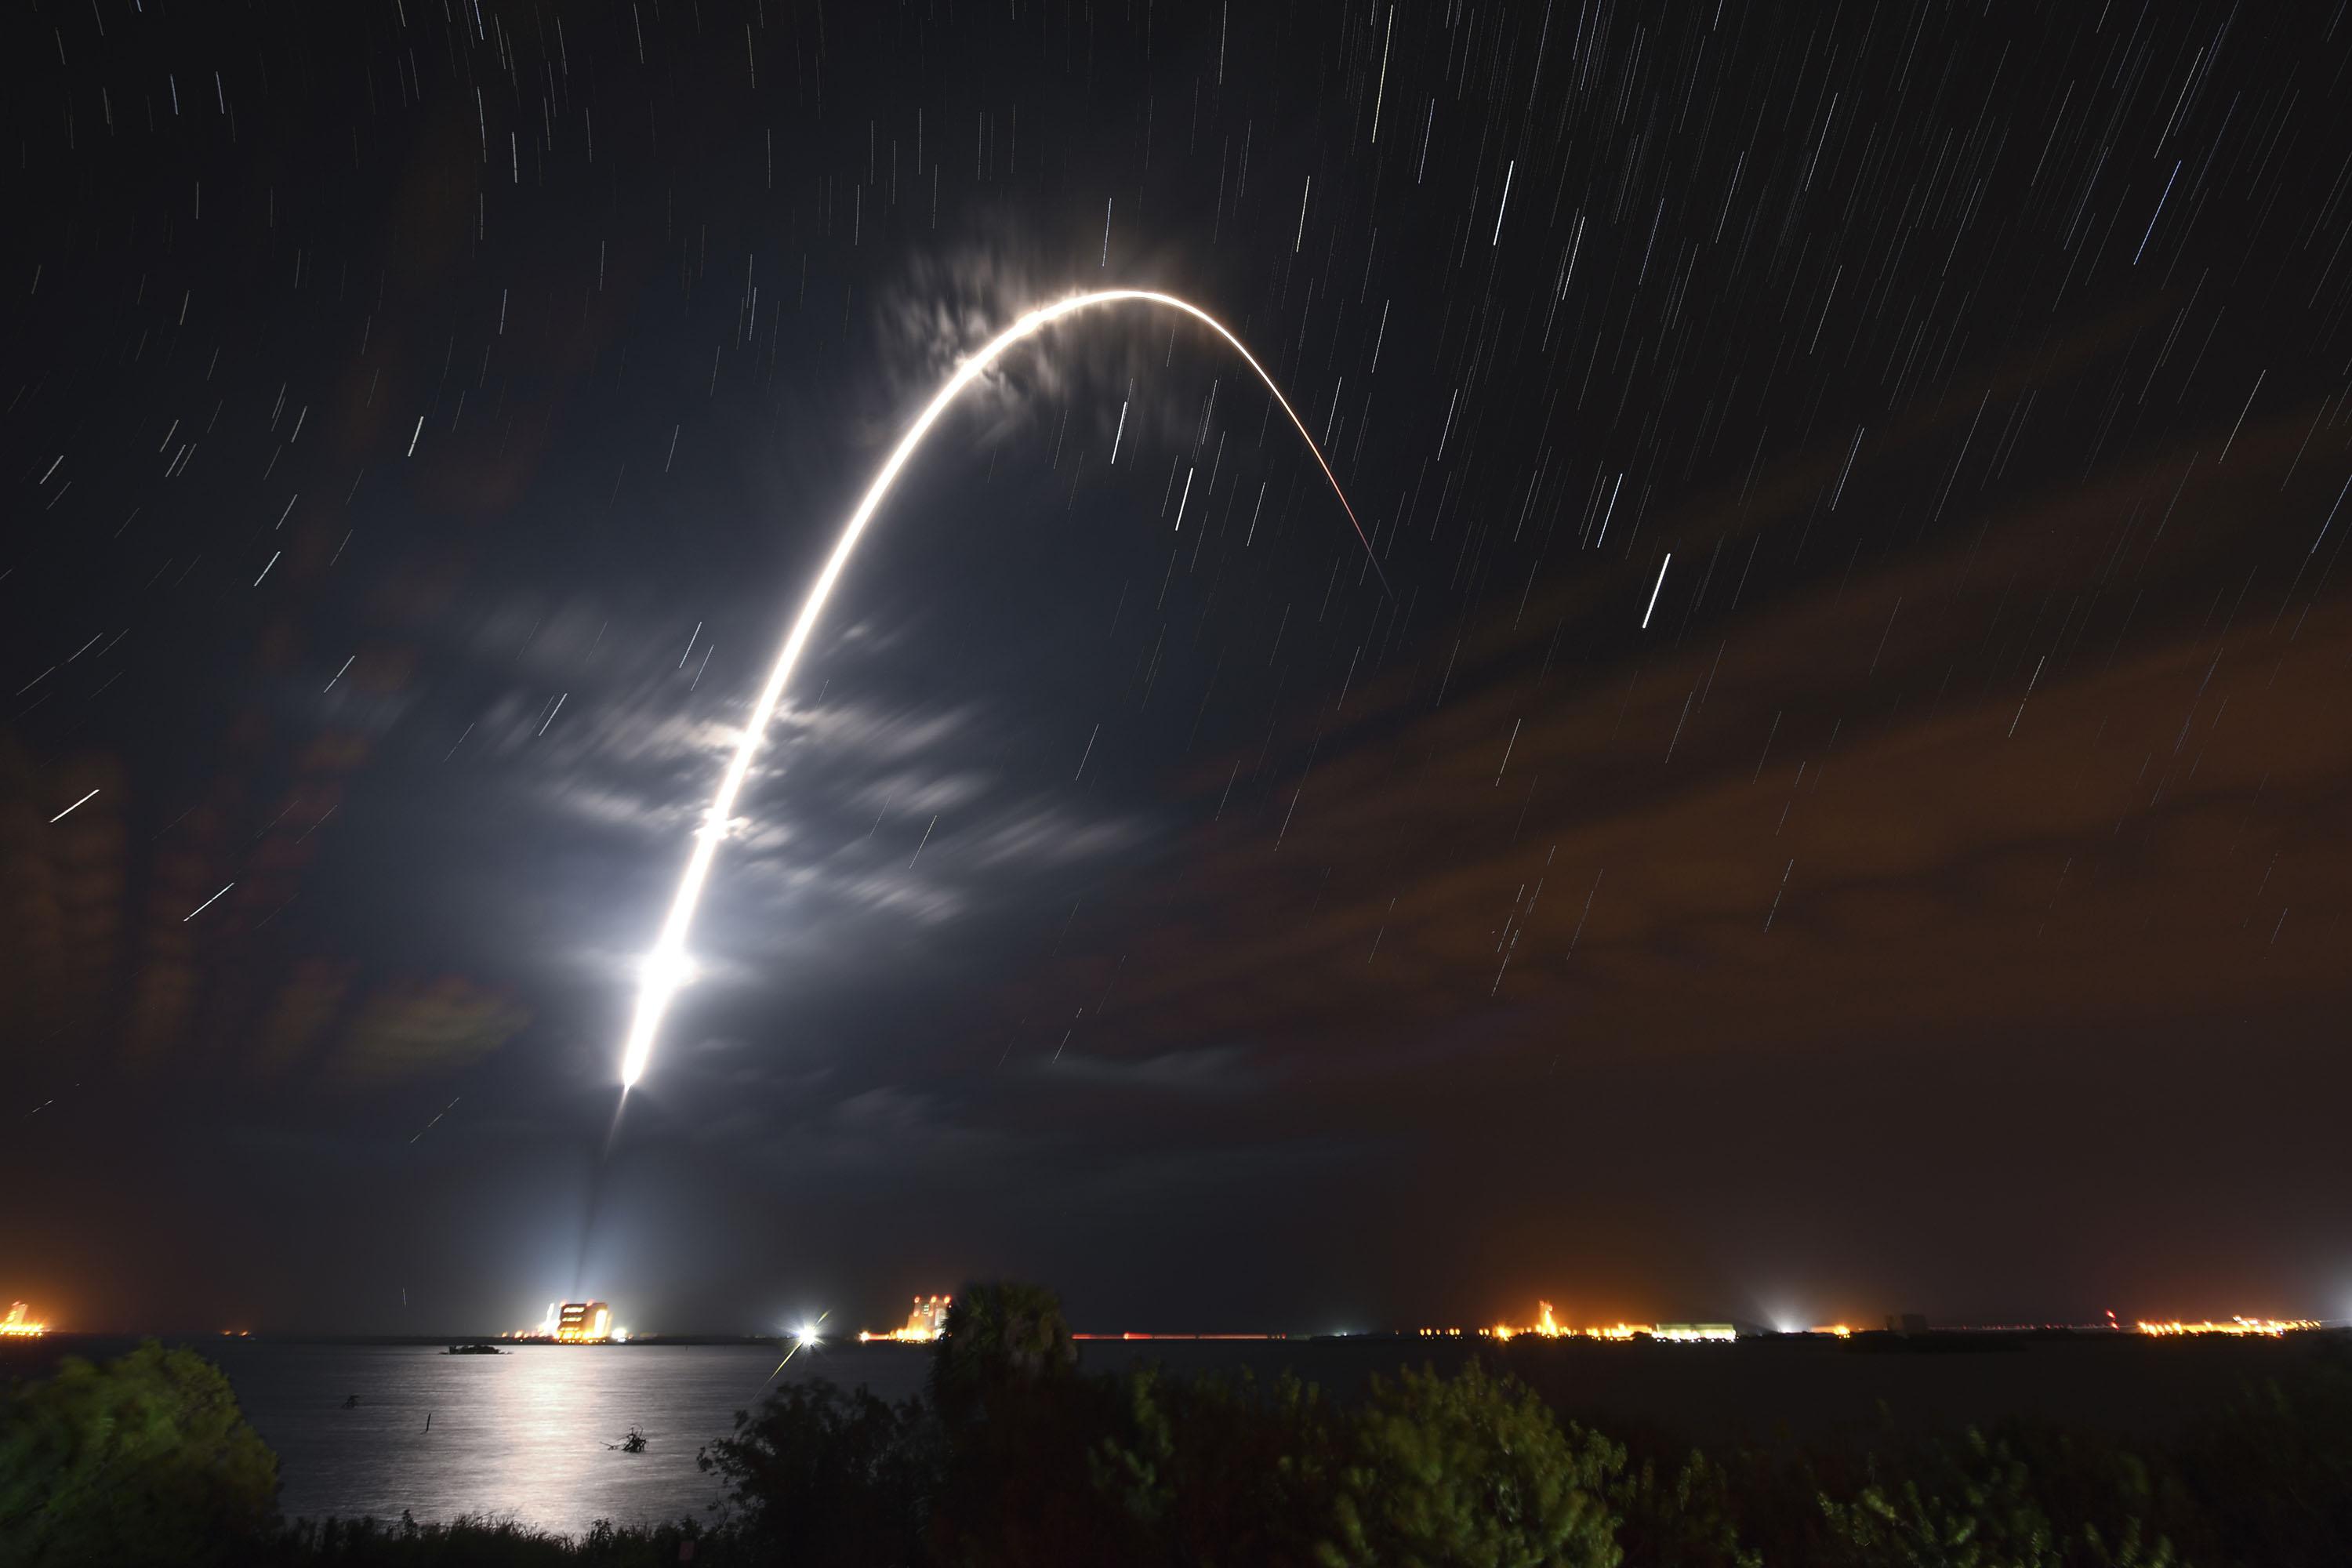 Spacex 4K wallpaper for your desktop or mobile screen free and easy to download